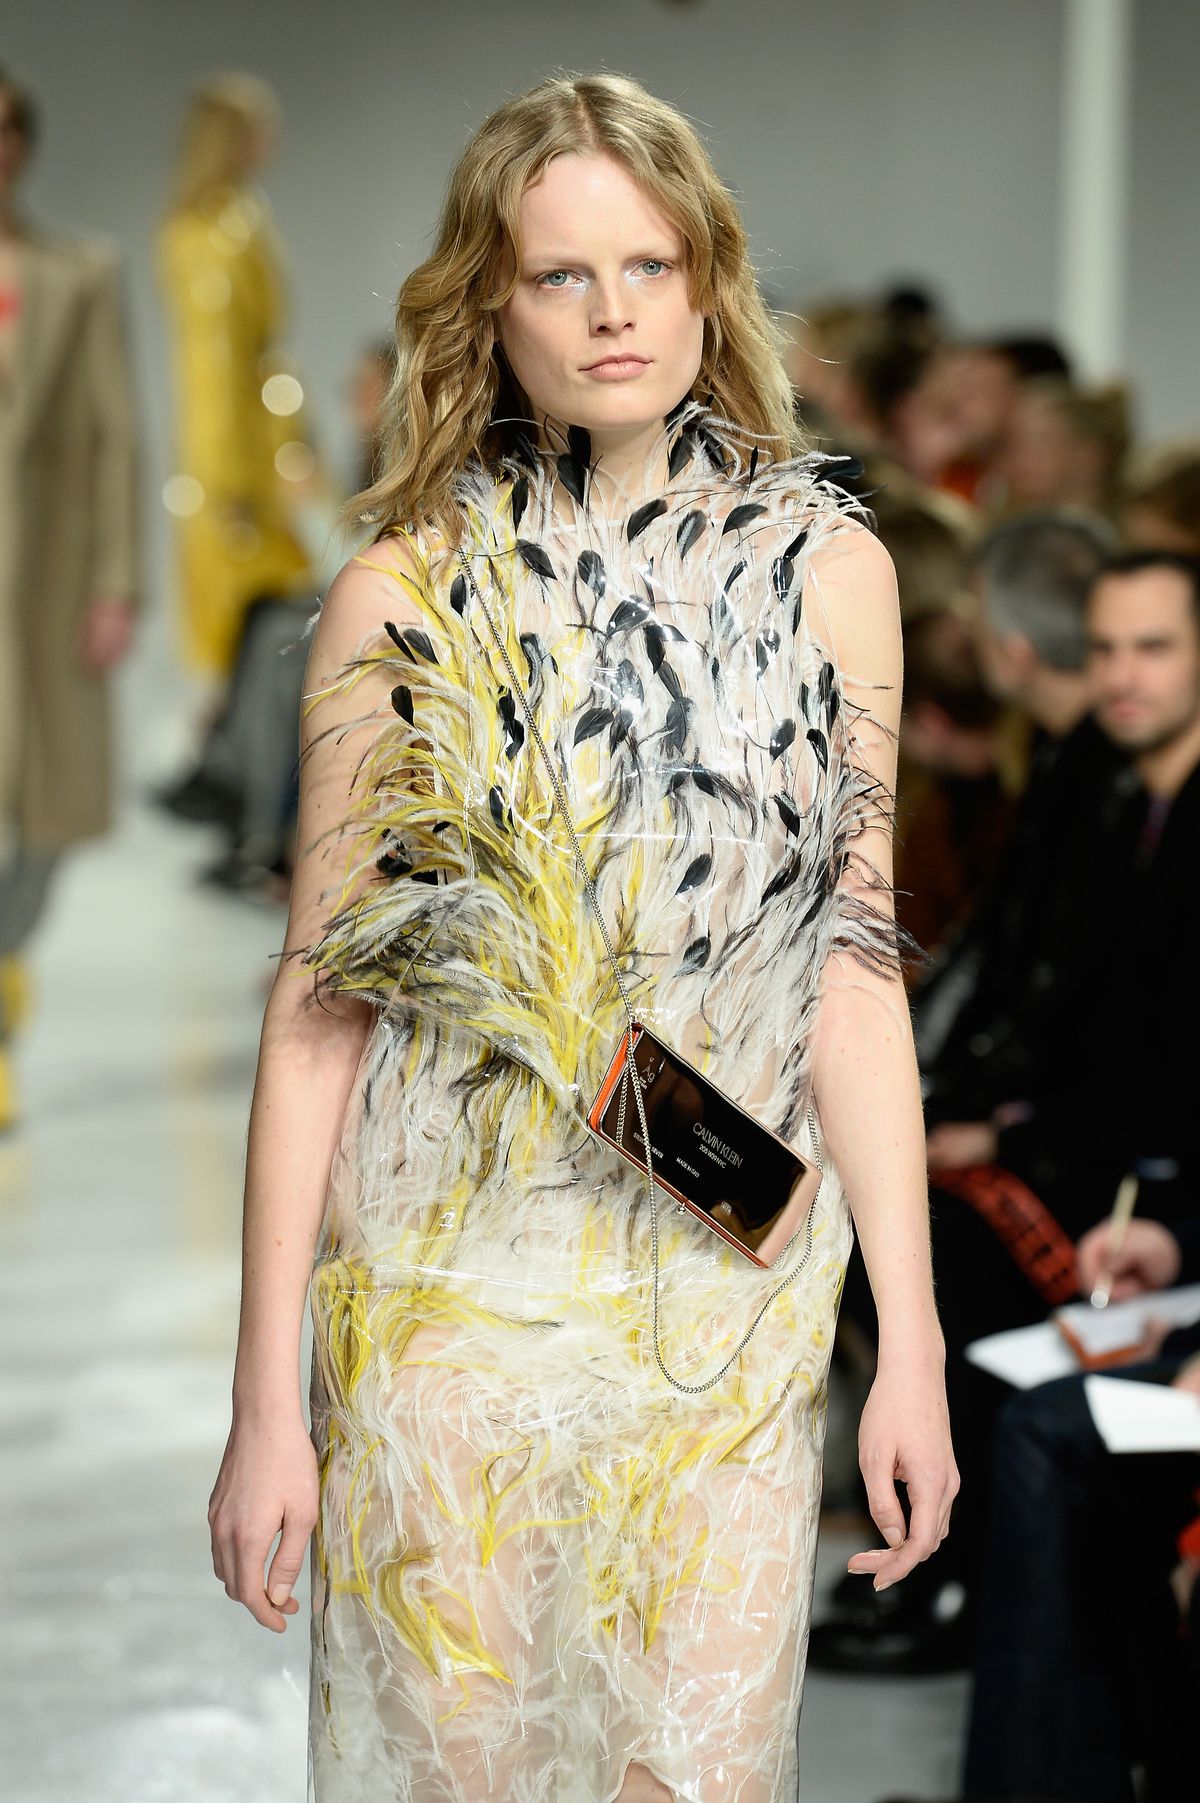 A model wears a yellow, white, and black feathered dress.